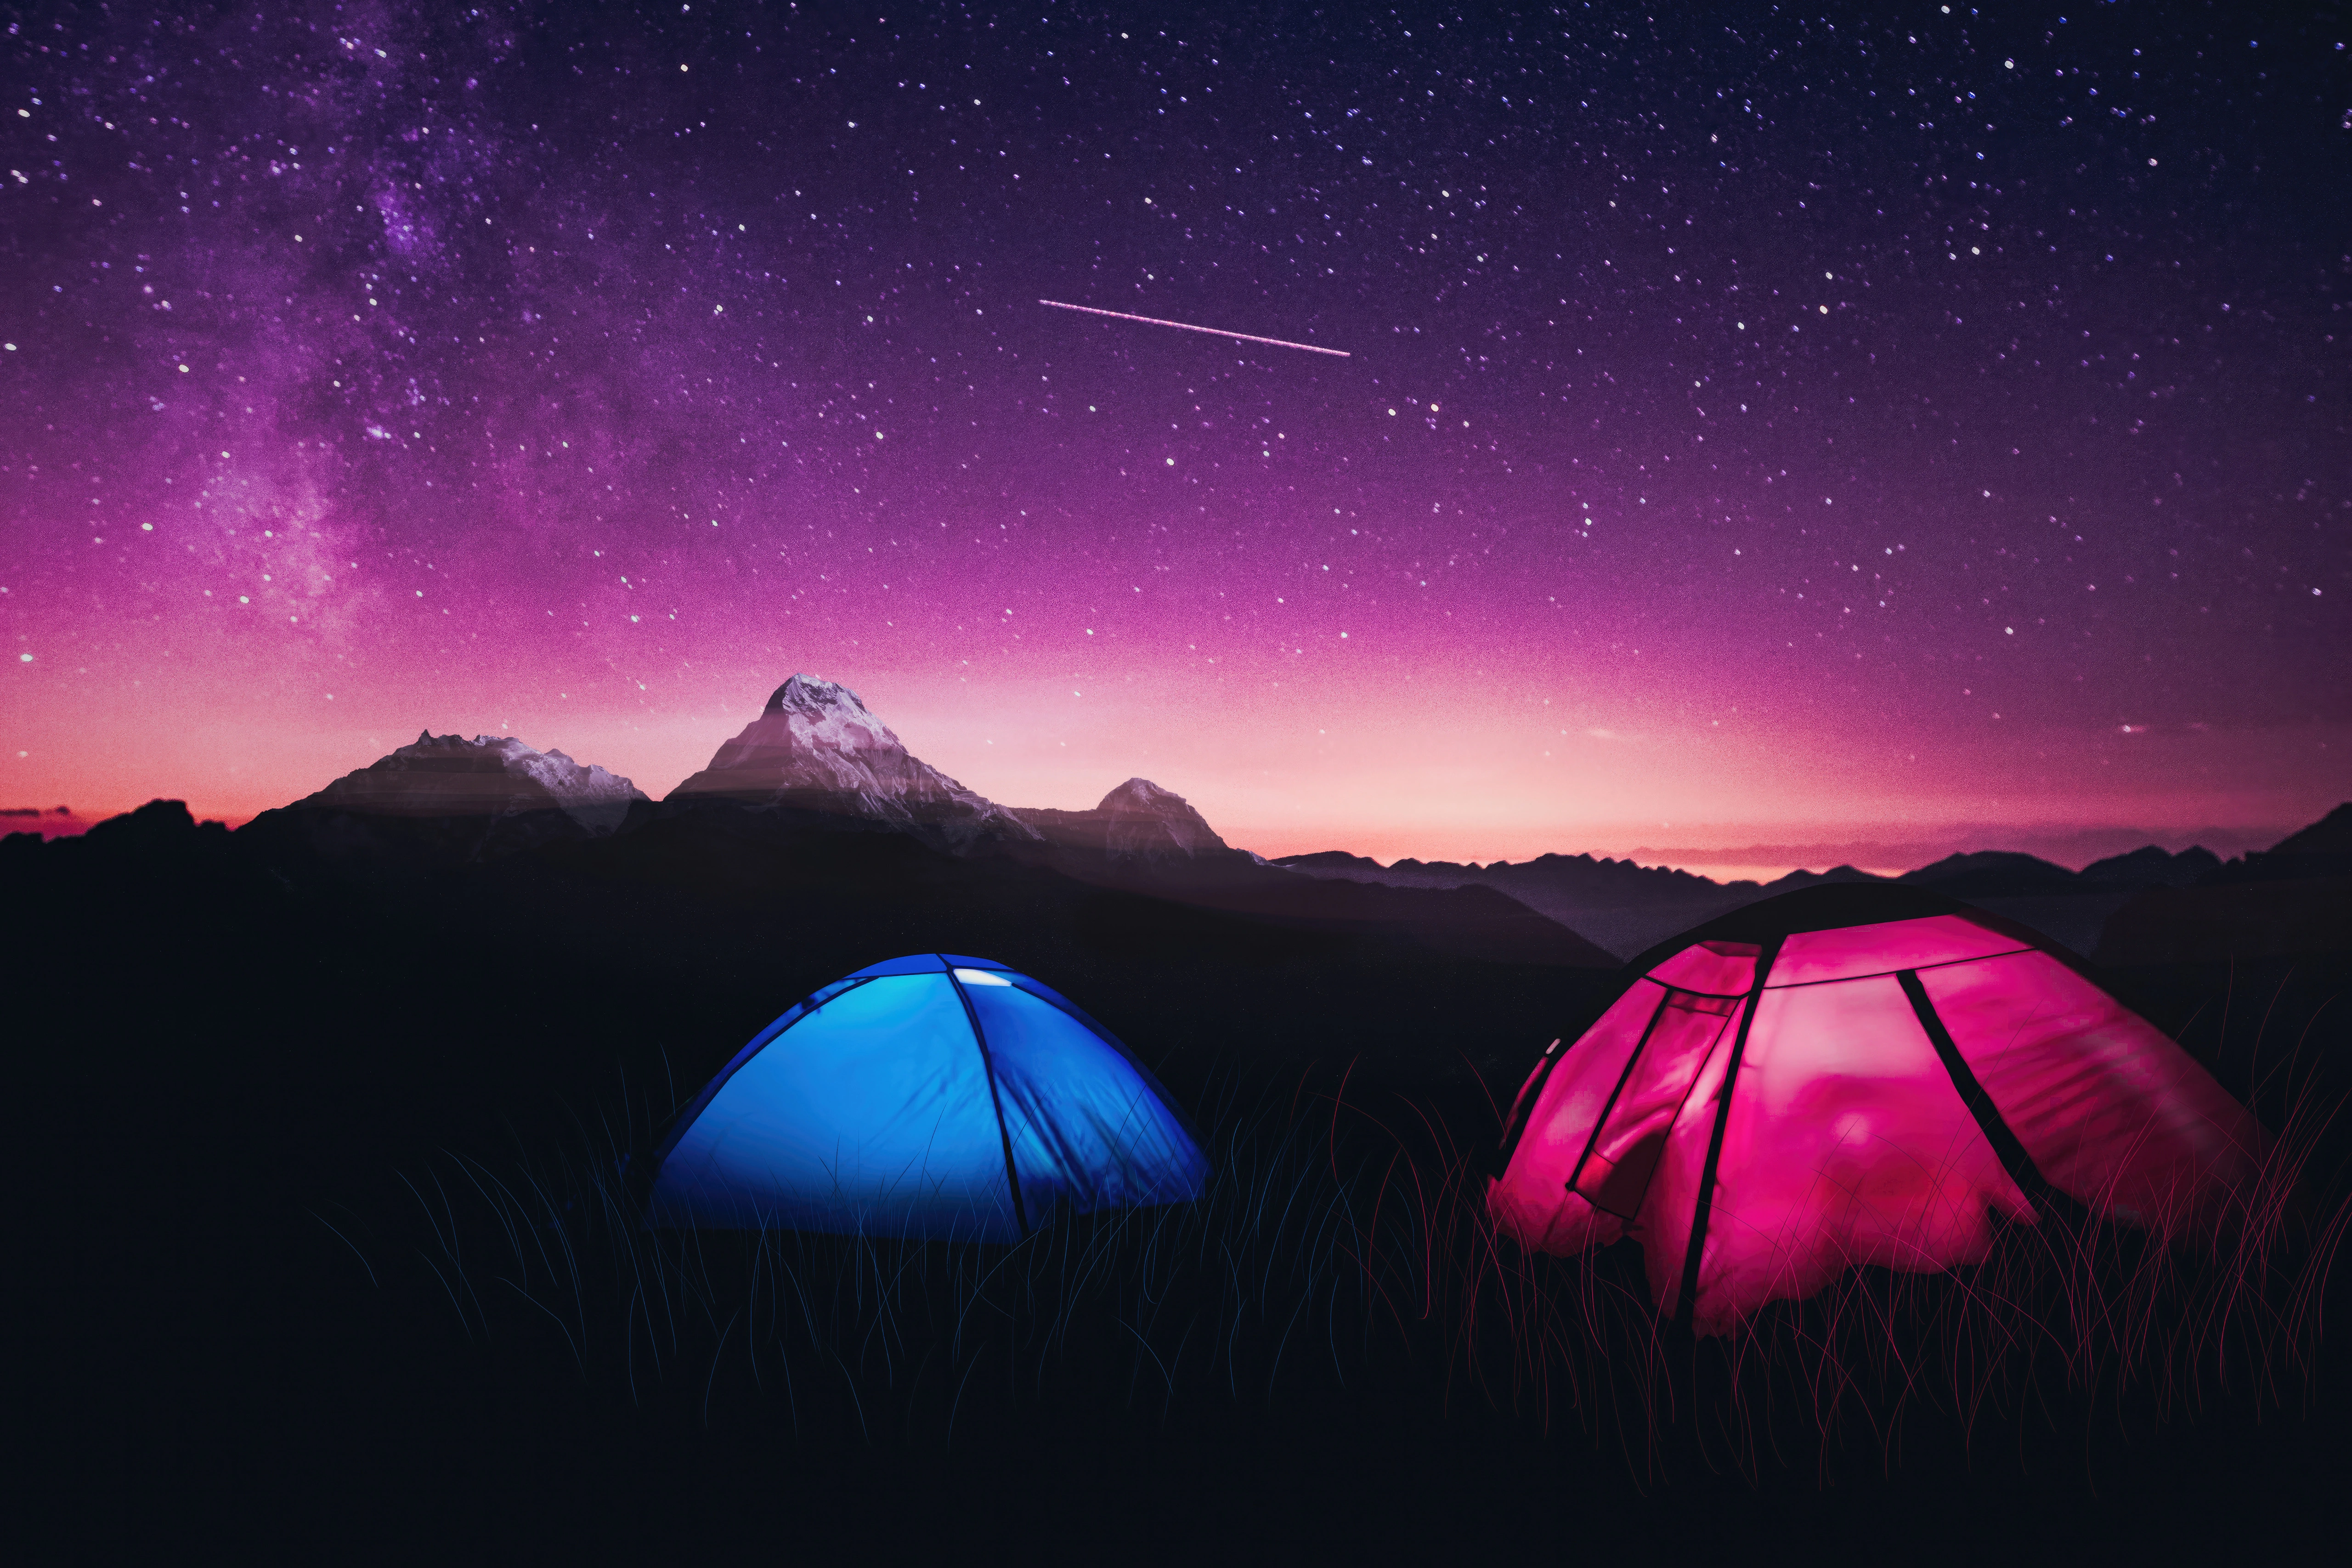 starry haven dome tents tourists and a purple sky at night 34.jpg